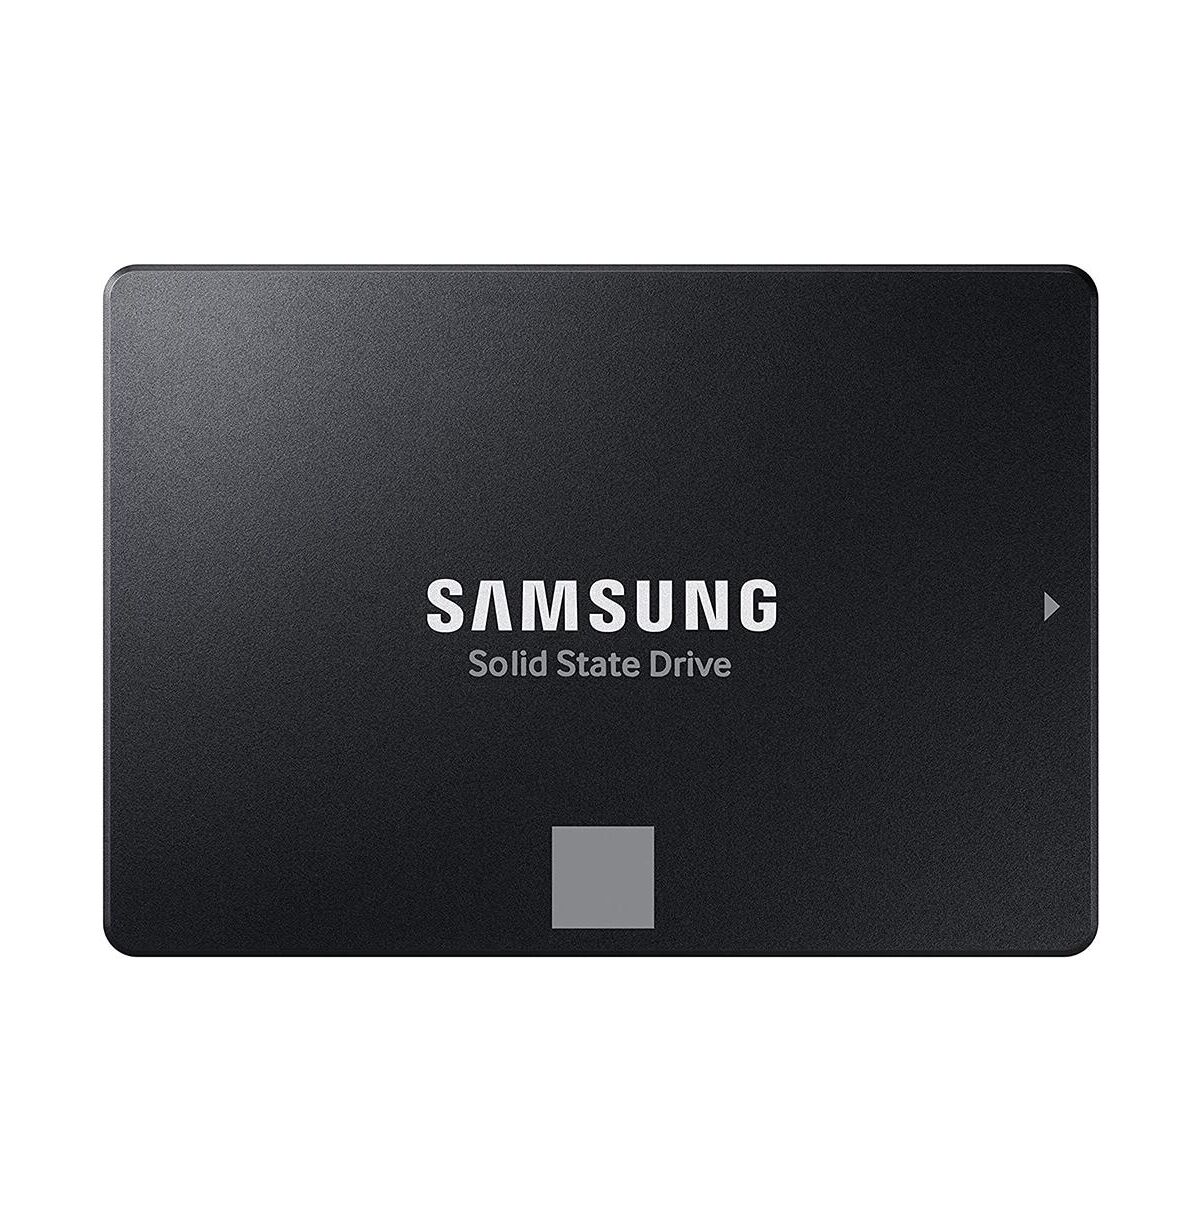 Samsung 870 Evo Internal Solid State Drive 1TB Sata Iii Accelerates write speeds up to 560/530 Mb/s sequential speeds and maintains long-term performance with